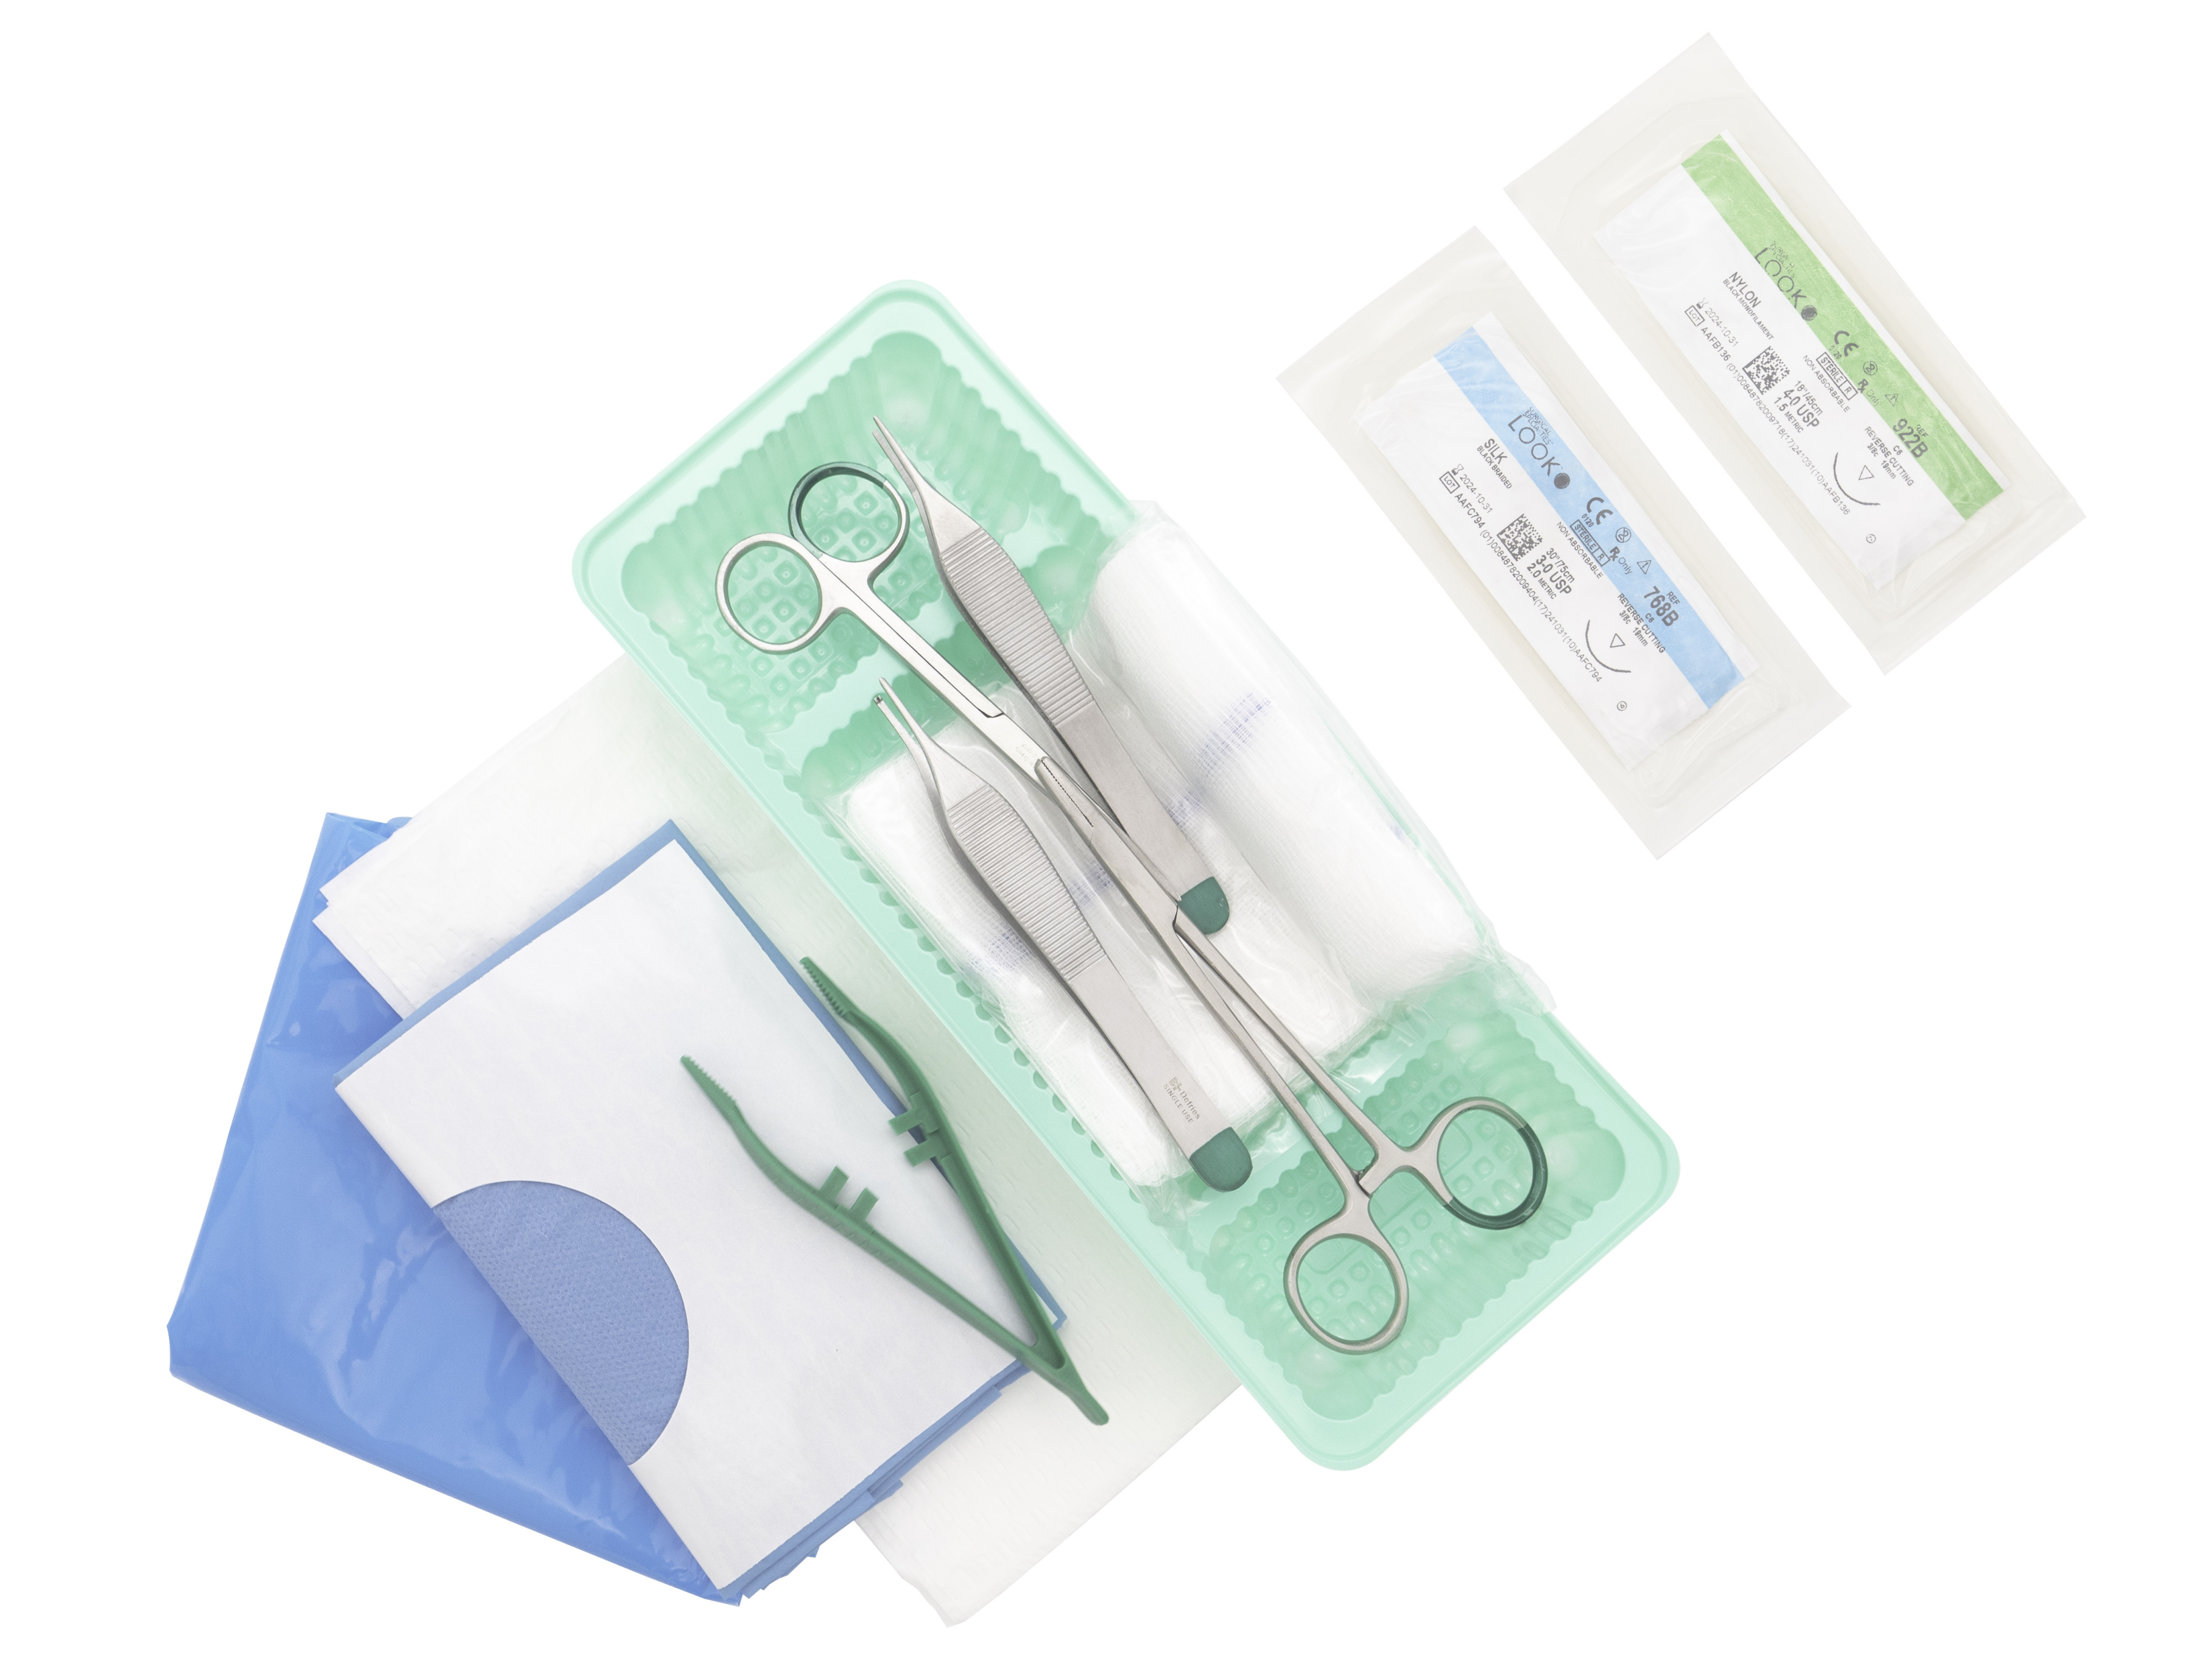 Auckland University Surgical Society - Capes Suture Kit